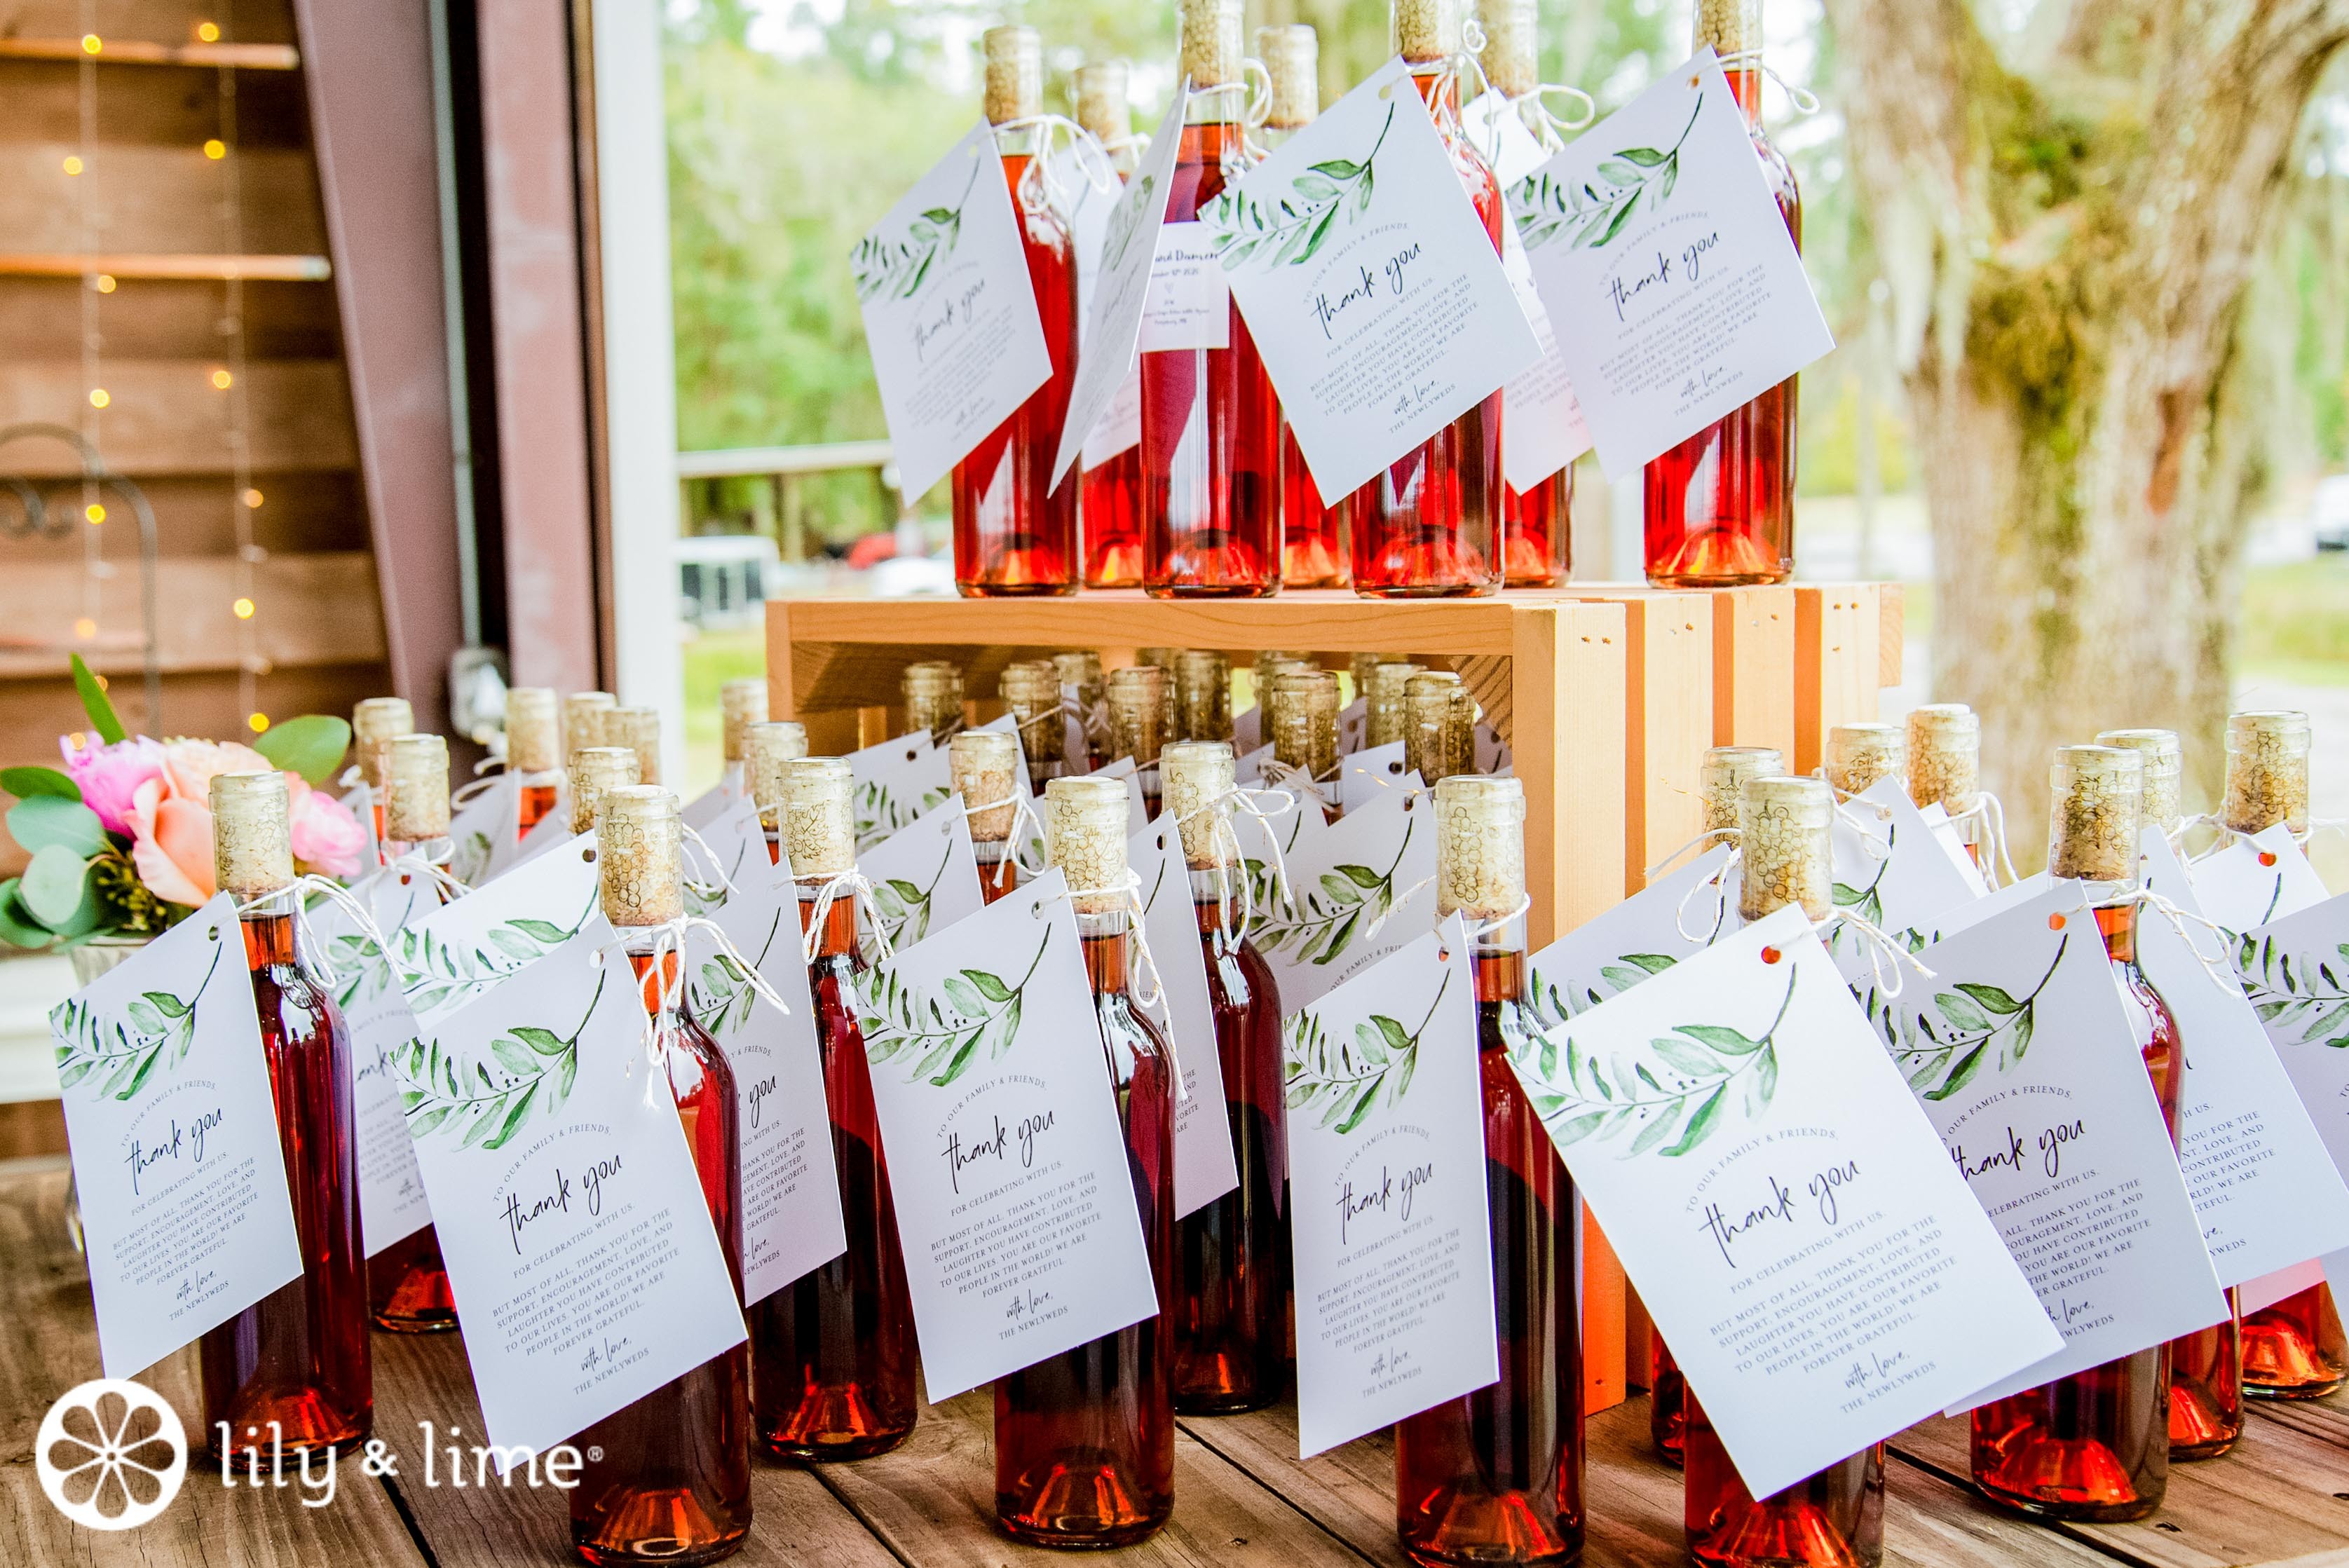 Wedding Favors, Corporate Event Gifts, Old Fashioned Drinking Jars